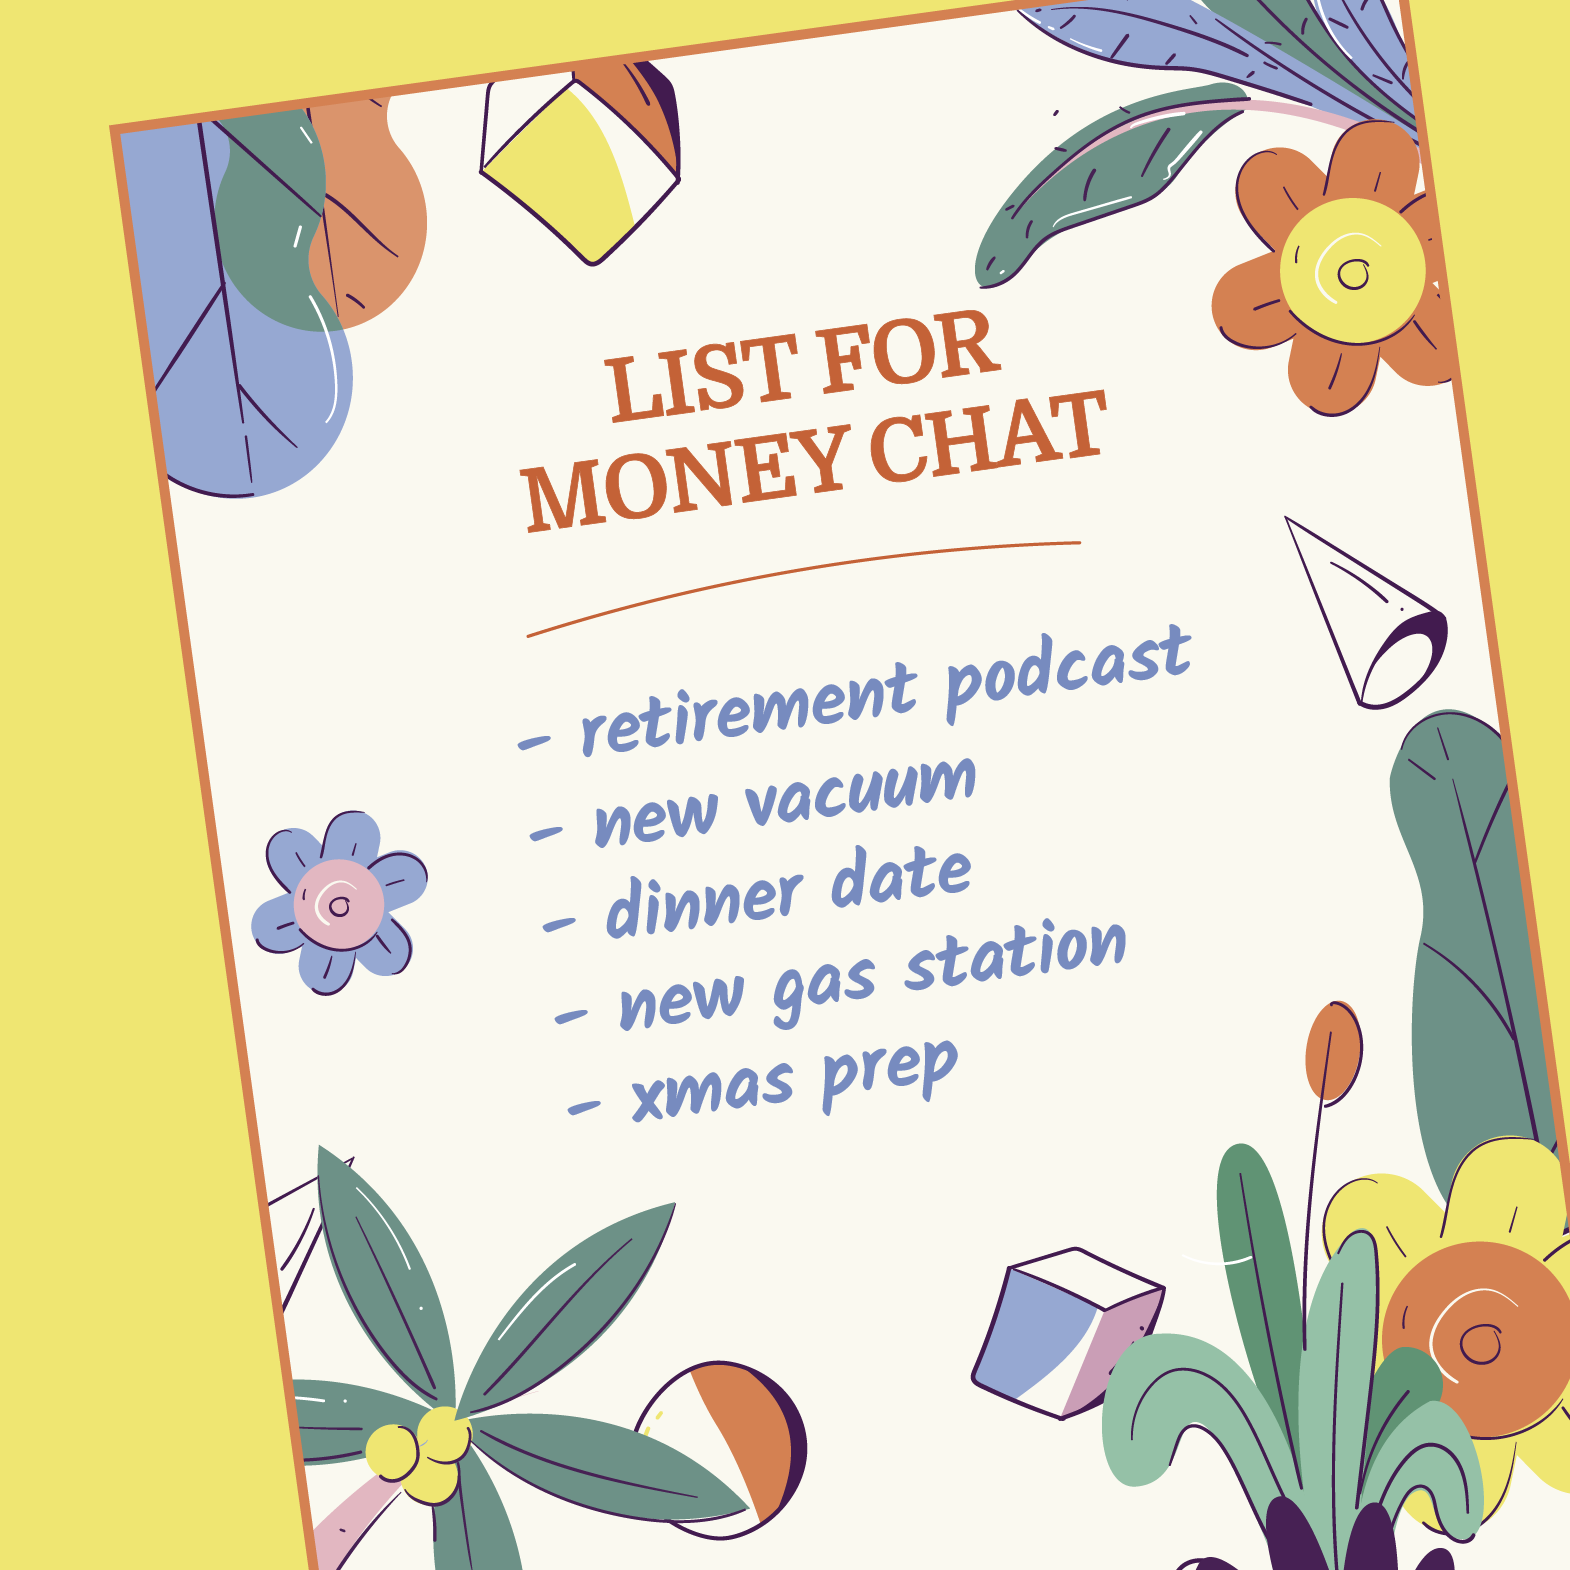 A list of potential topics for a chat about money